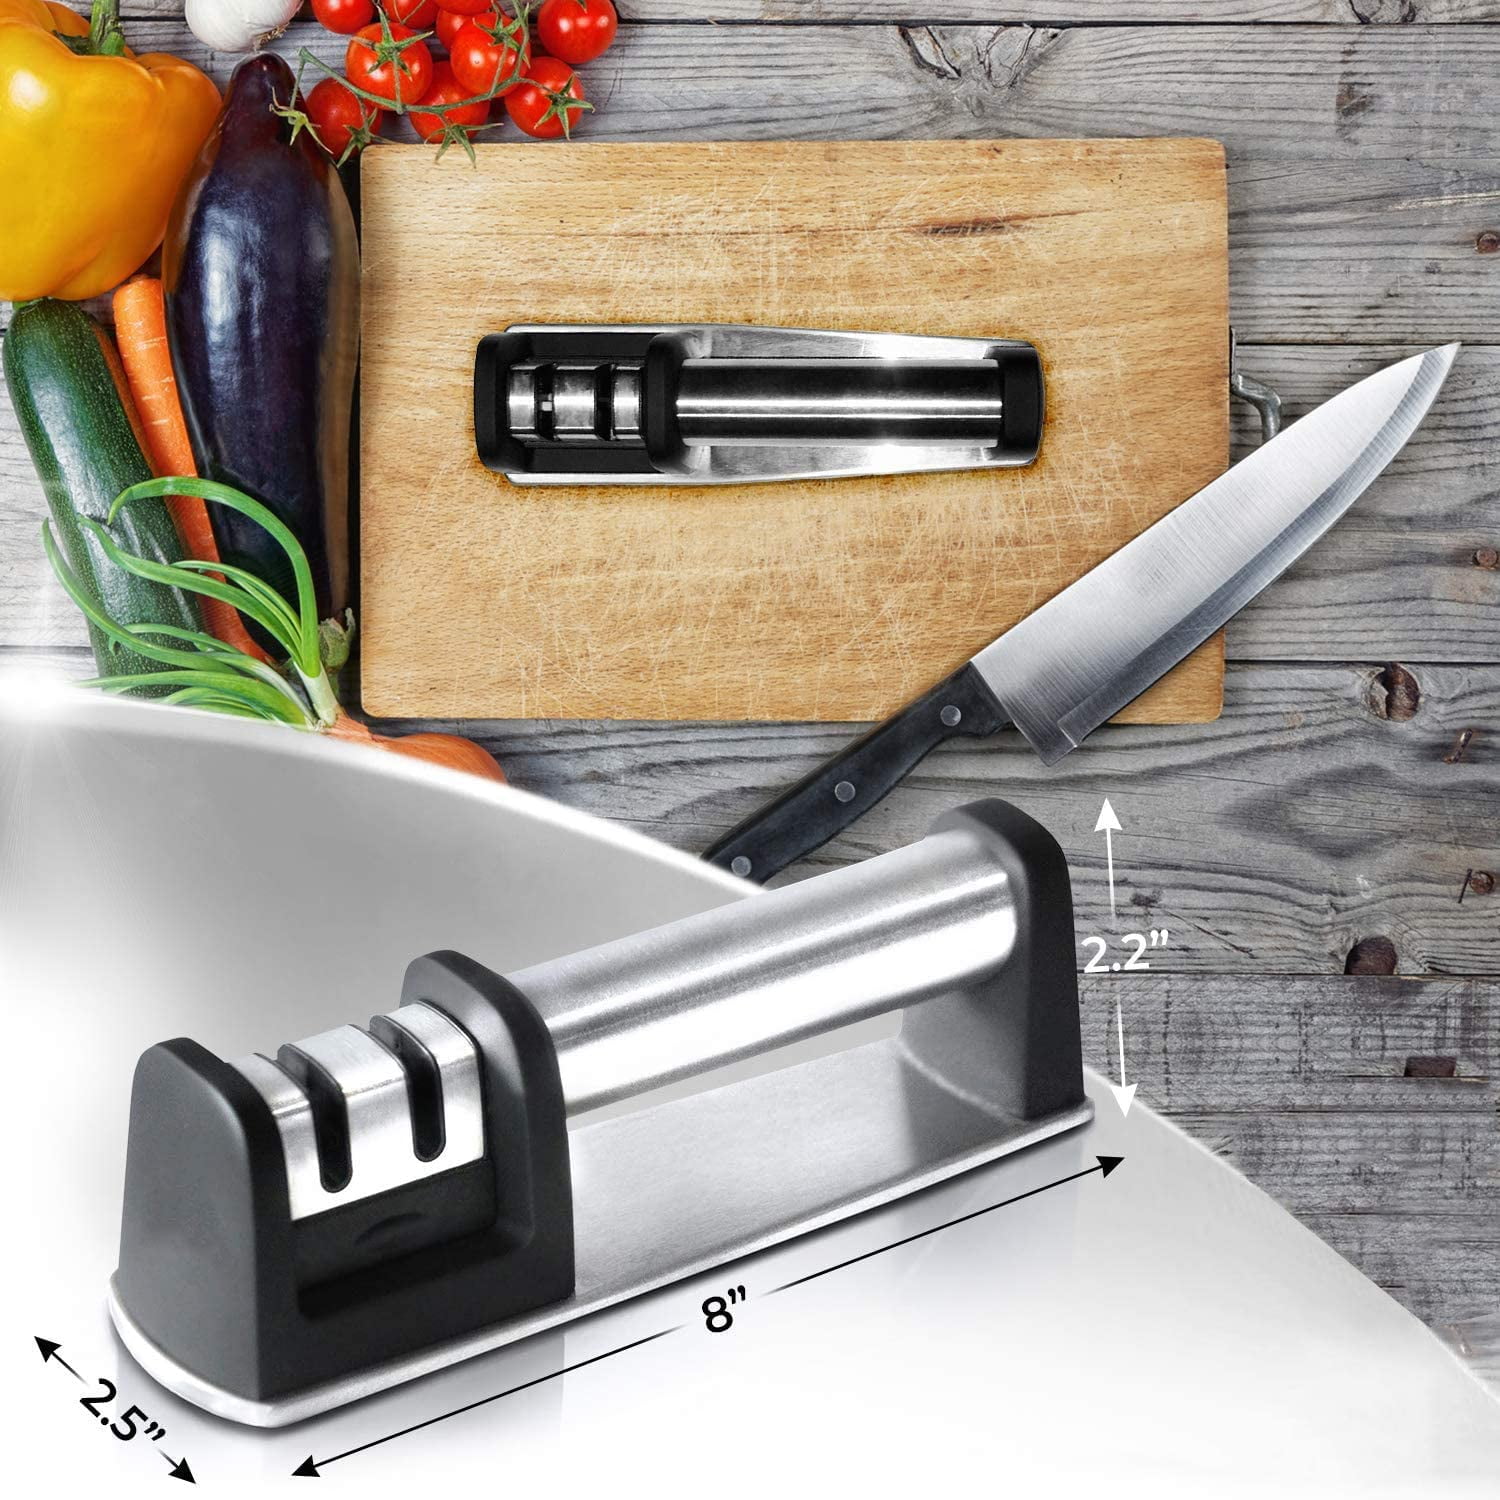 KNIFE SHARPENER Ceramic Tungsten Kitchen Knives Blade Sharpening System  Tool USA XH, 1 Pack - Fry's Food Stores